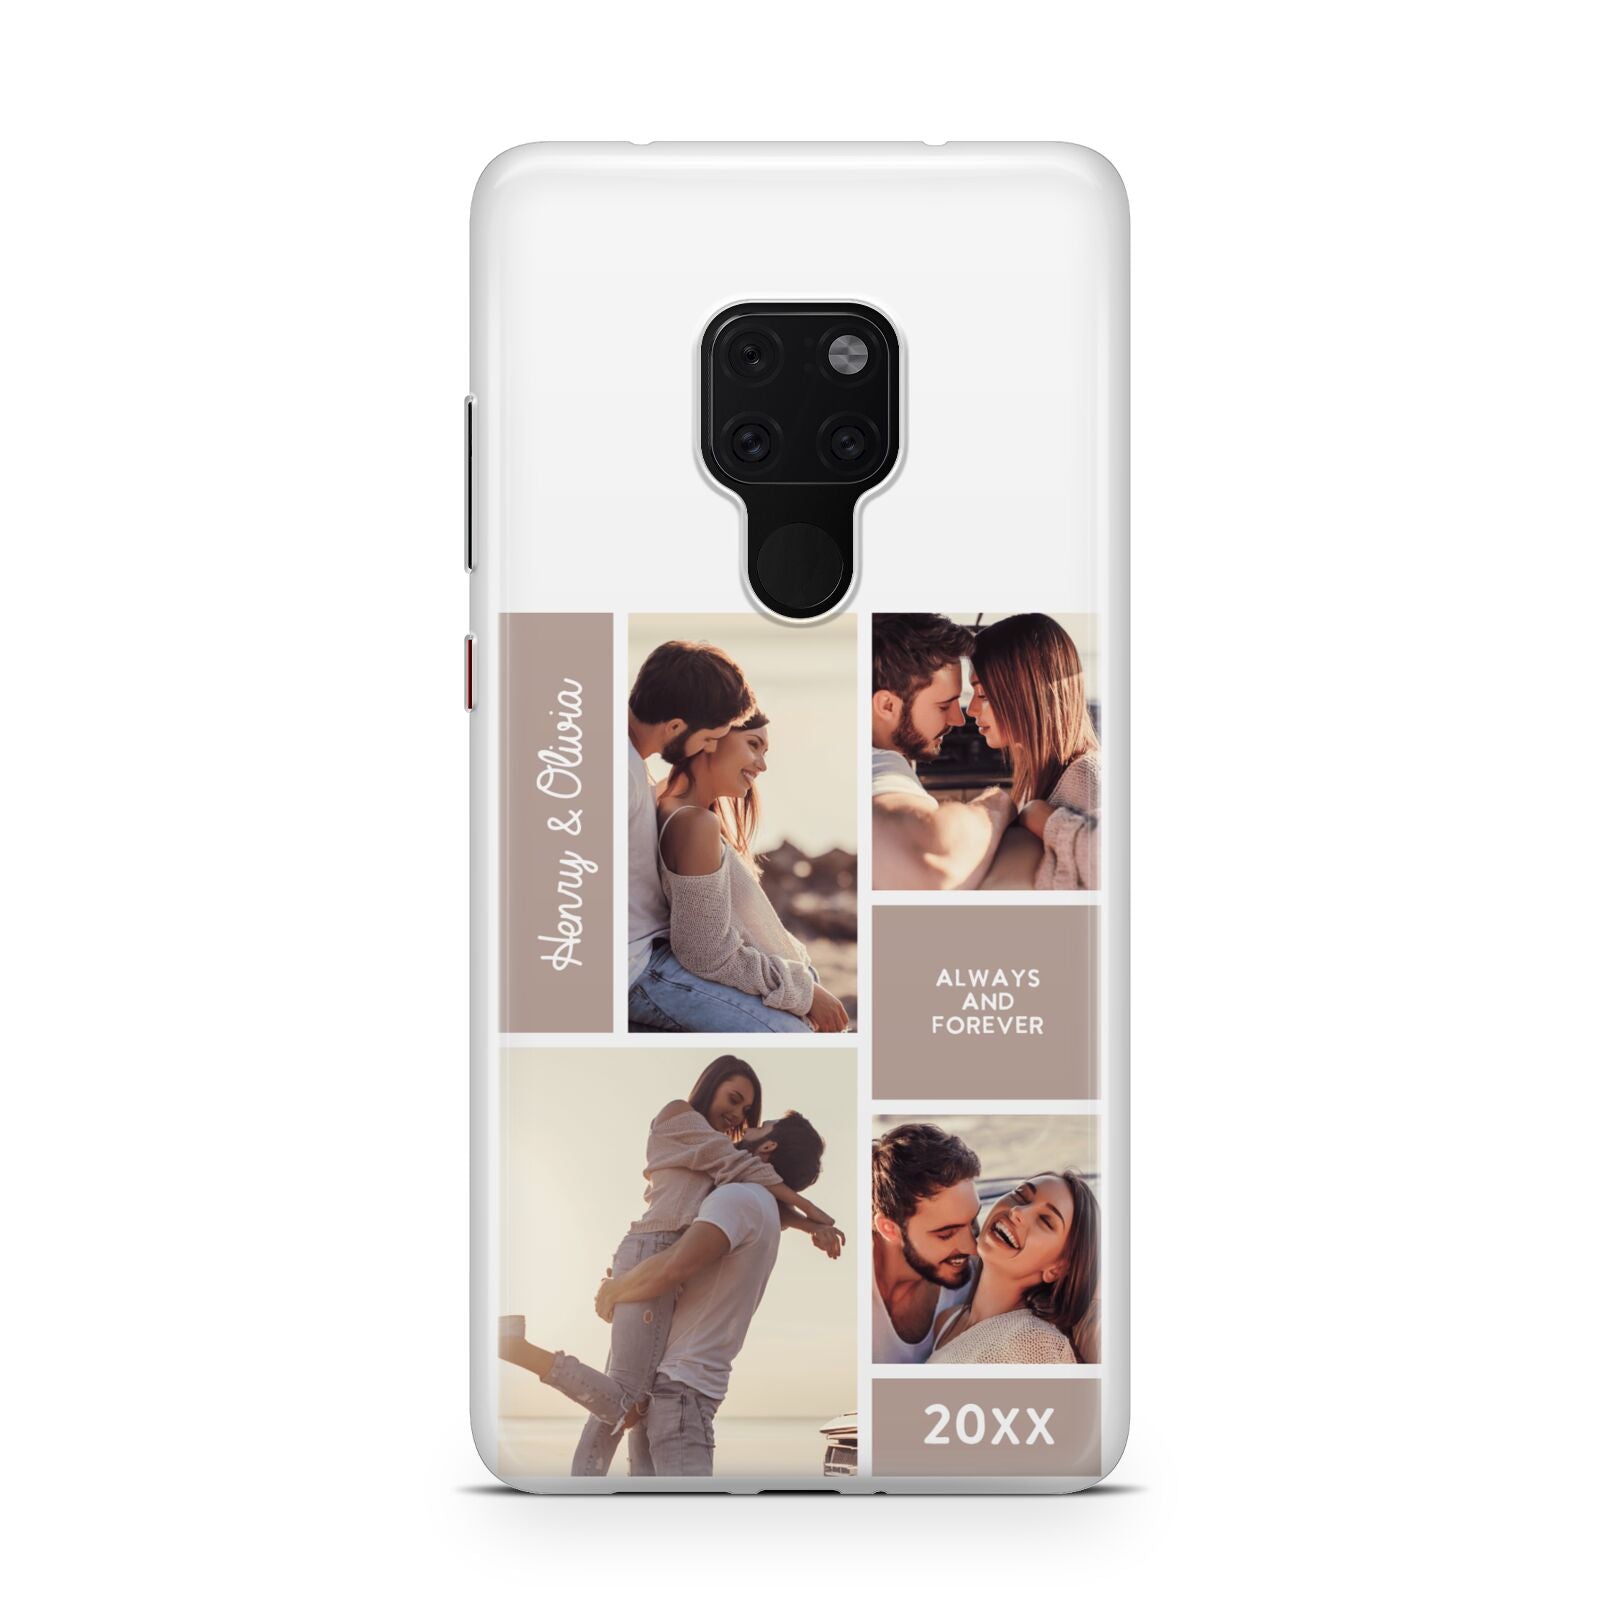 Couples Valentine Photo Collage Personalised Huawei Mate 20 Phone Case